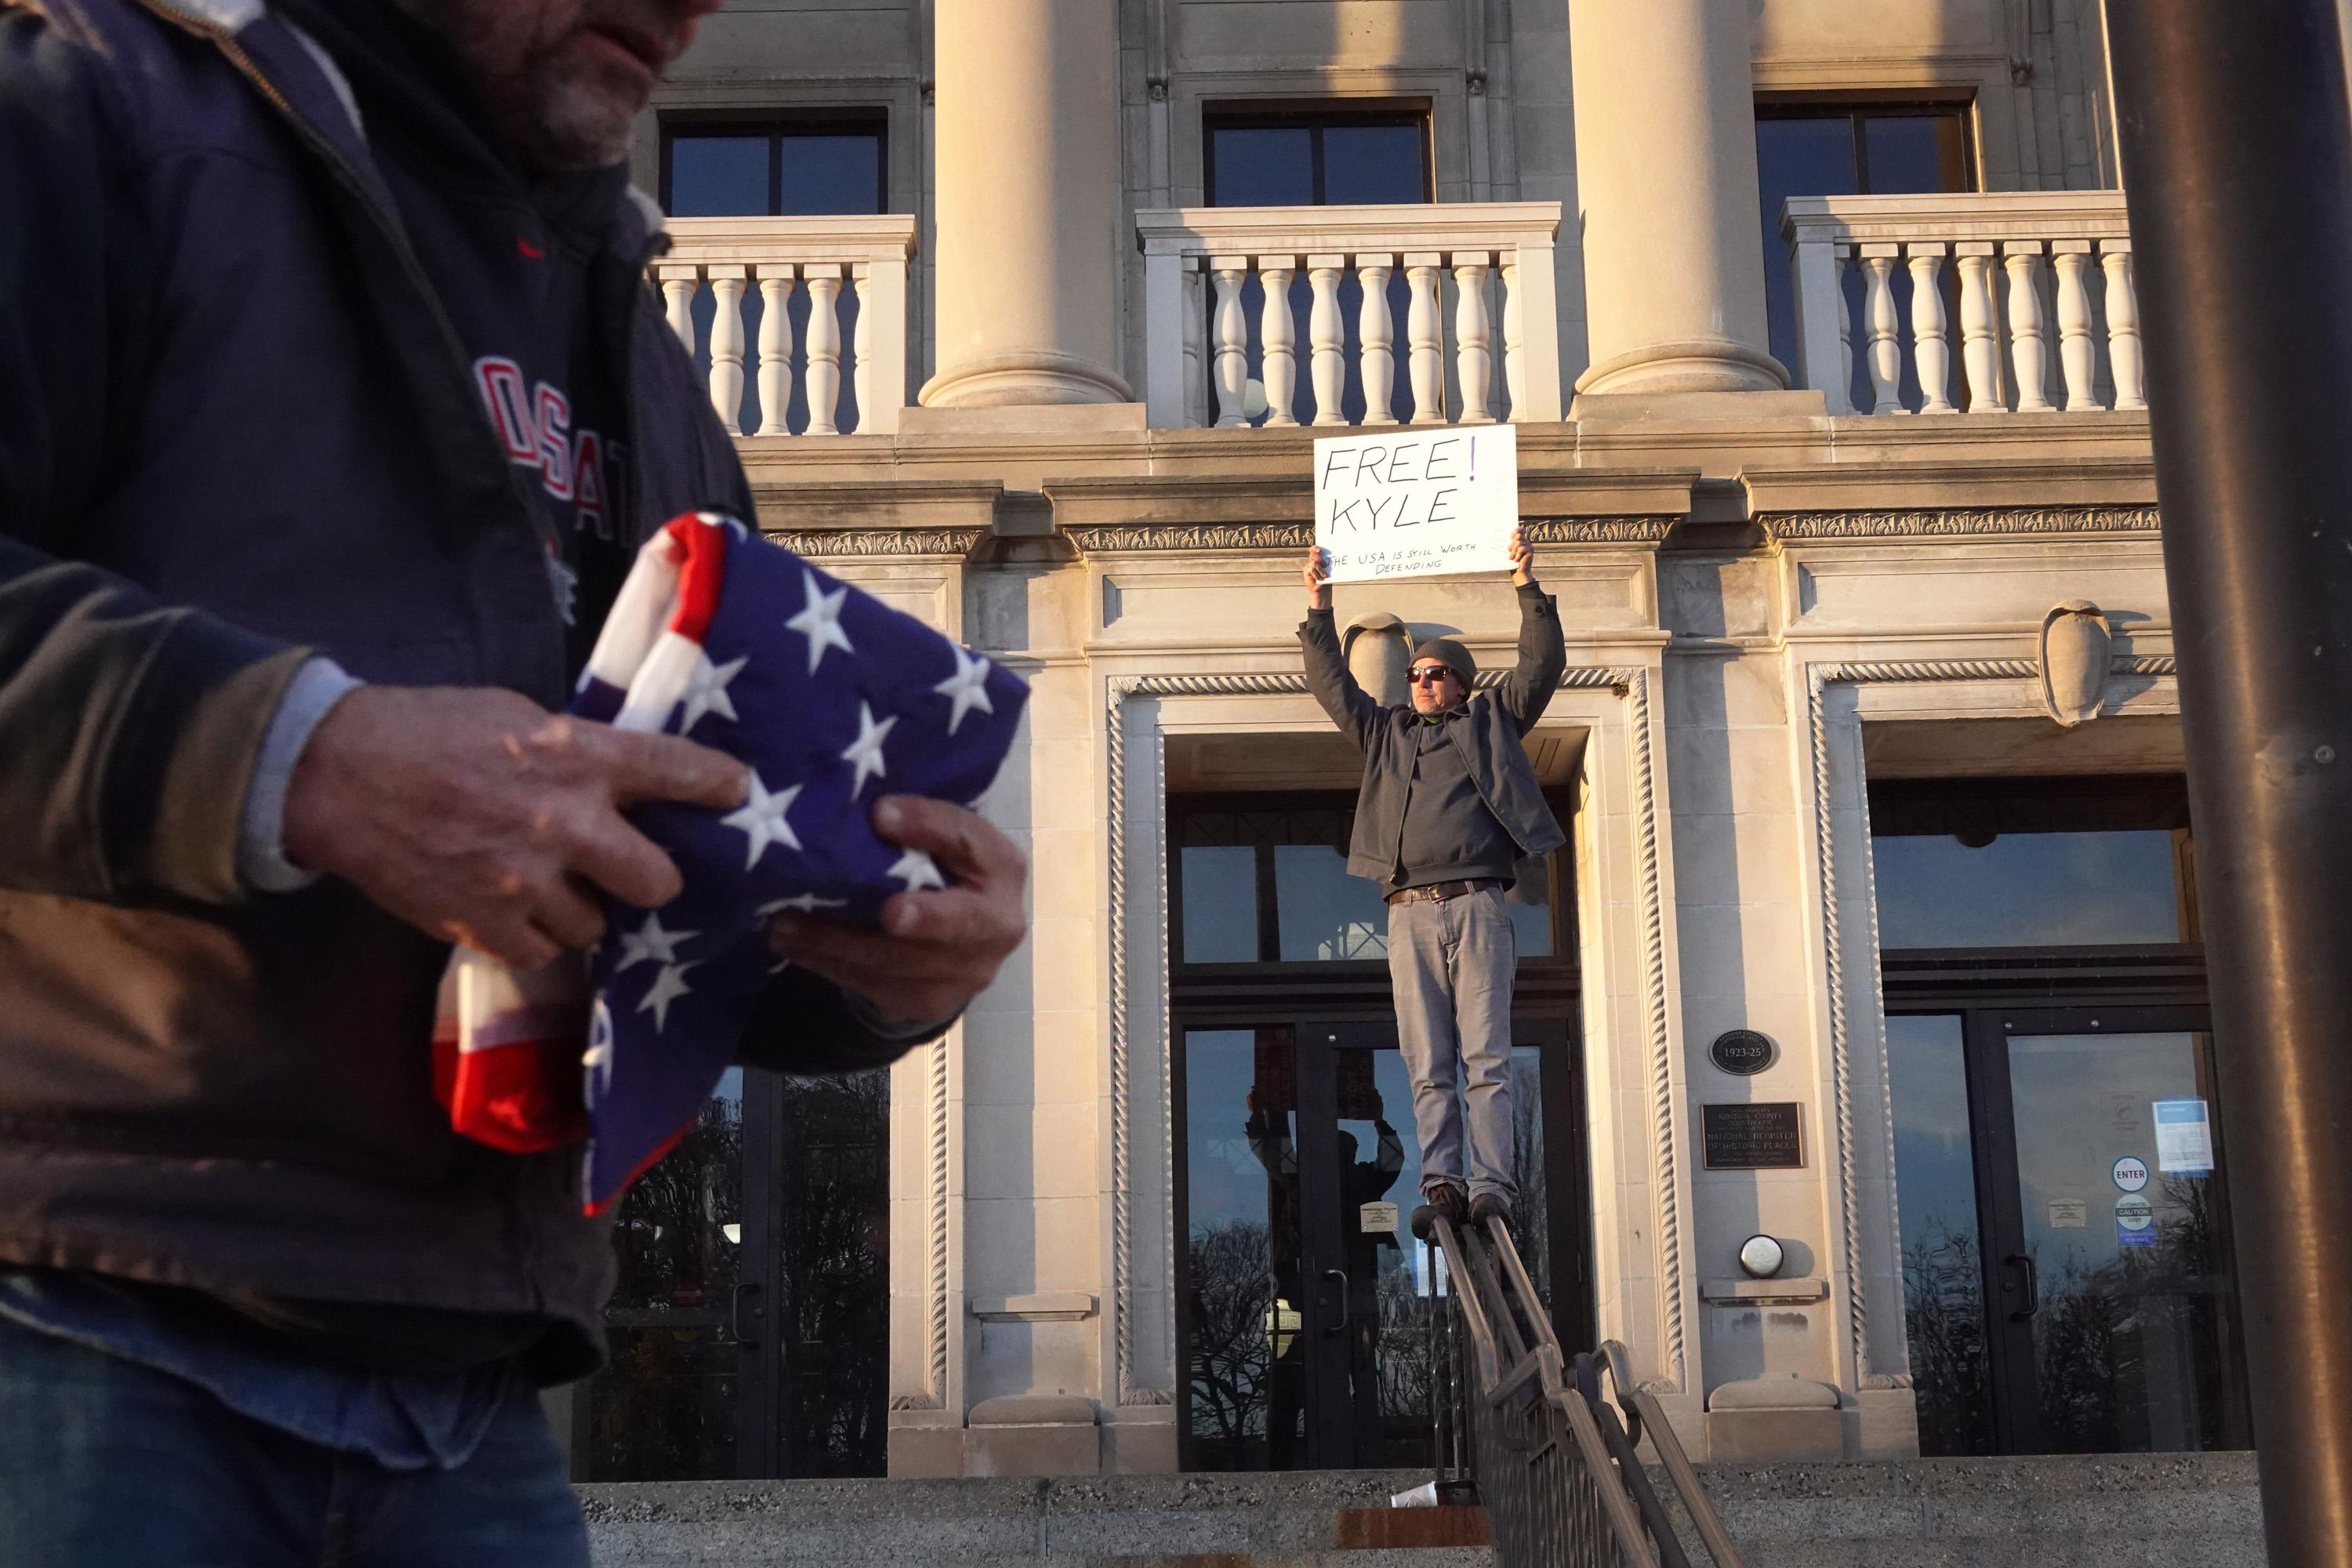 A person stands on a railing outside the courthouse holding a “Free Kyle” sign while a man in a hoodie walks in the foreground holding a folded American flag.